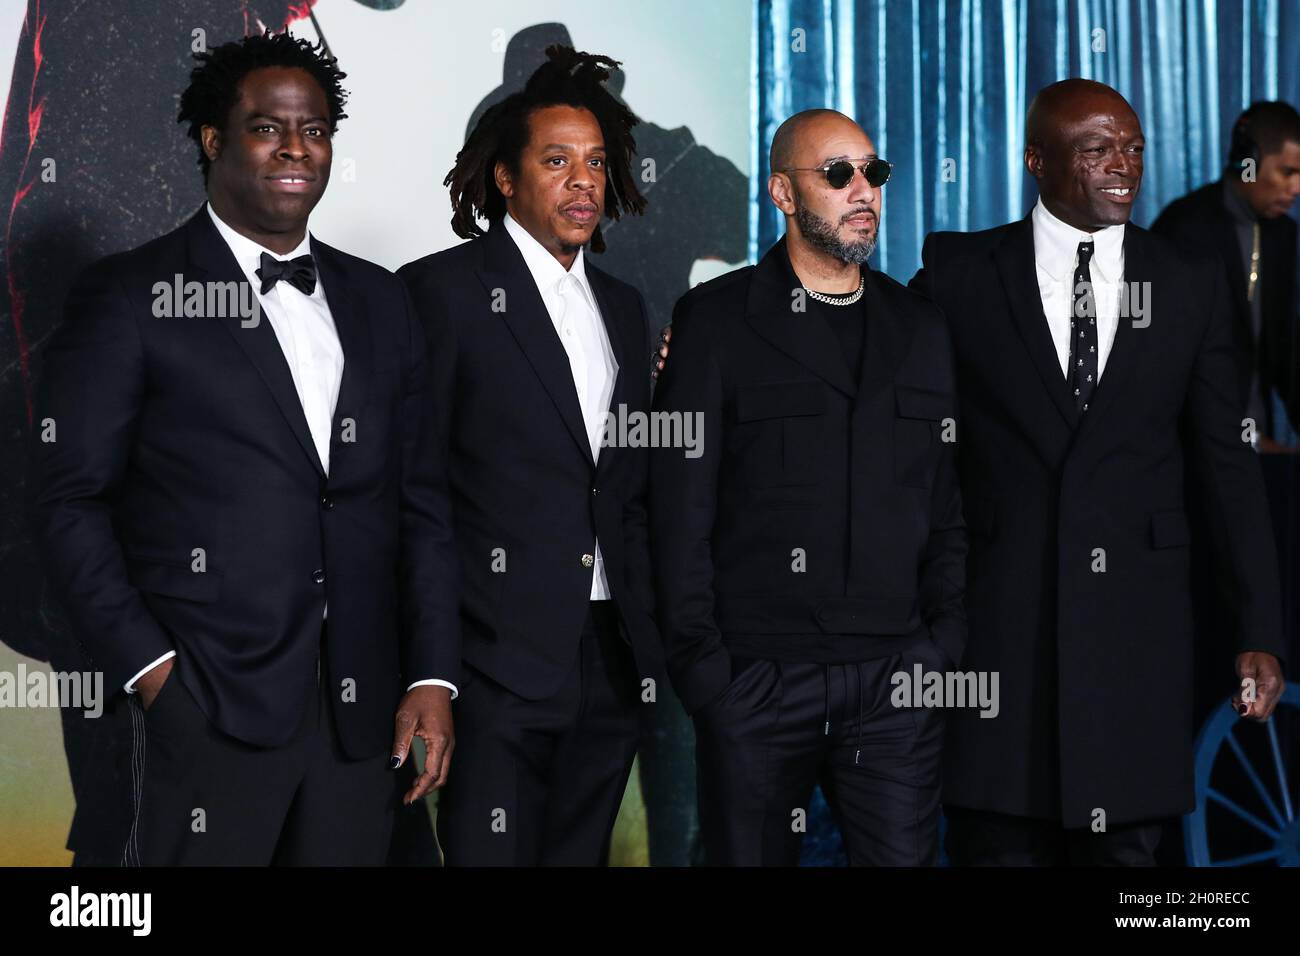 Los Angeles, United States. 13th Oct, 2021. LOS ANGELES, CALIFORNIA, USA - OCTOBER 13: Director Jeymes Samuel, rapper/producer Jay-Z (Shawn Corey Carter), record producer Swizz Beatz (Kasseem Daoud Dean) and singer-songwriter Seal (Henry Olusegun Adeola Samuel) arrive at the Los Angeles Premiere Of Netflix's 'The Harder They Fall' held at the Shrine Auditorium and Expo Hall on October 13, 2021 in Los Angeles, California, United States. (Photo by Xavier Collin/Image Press Agency/Sipa USA) Credit: Sipa USA/Alamy Live News Stock Photo